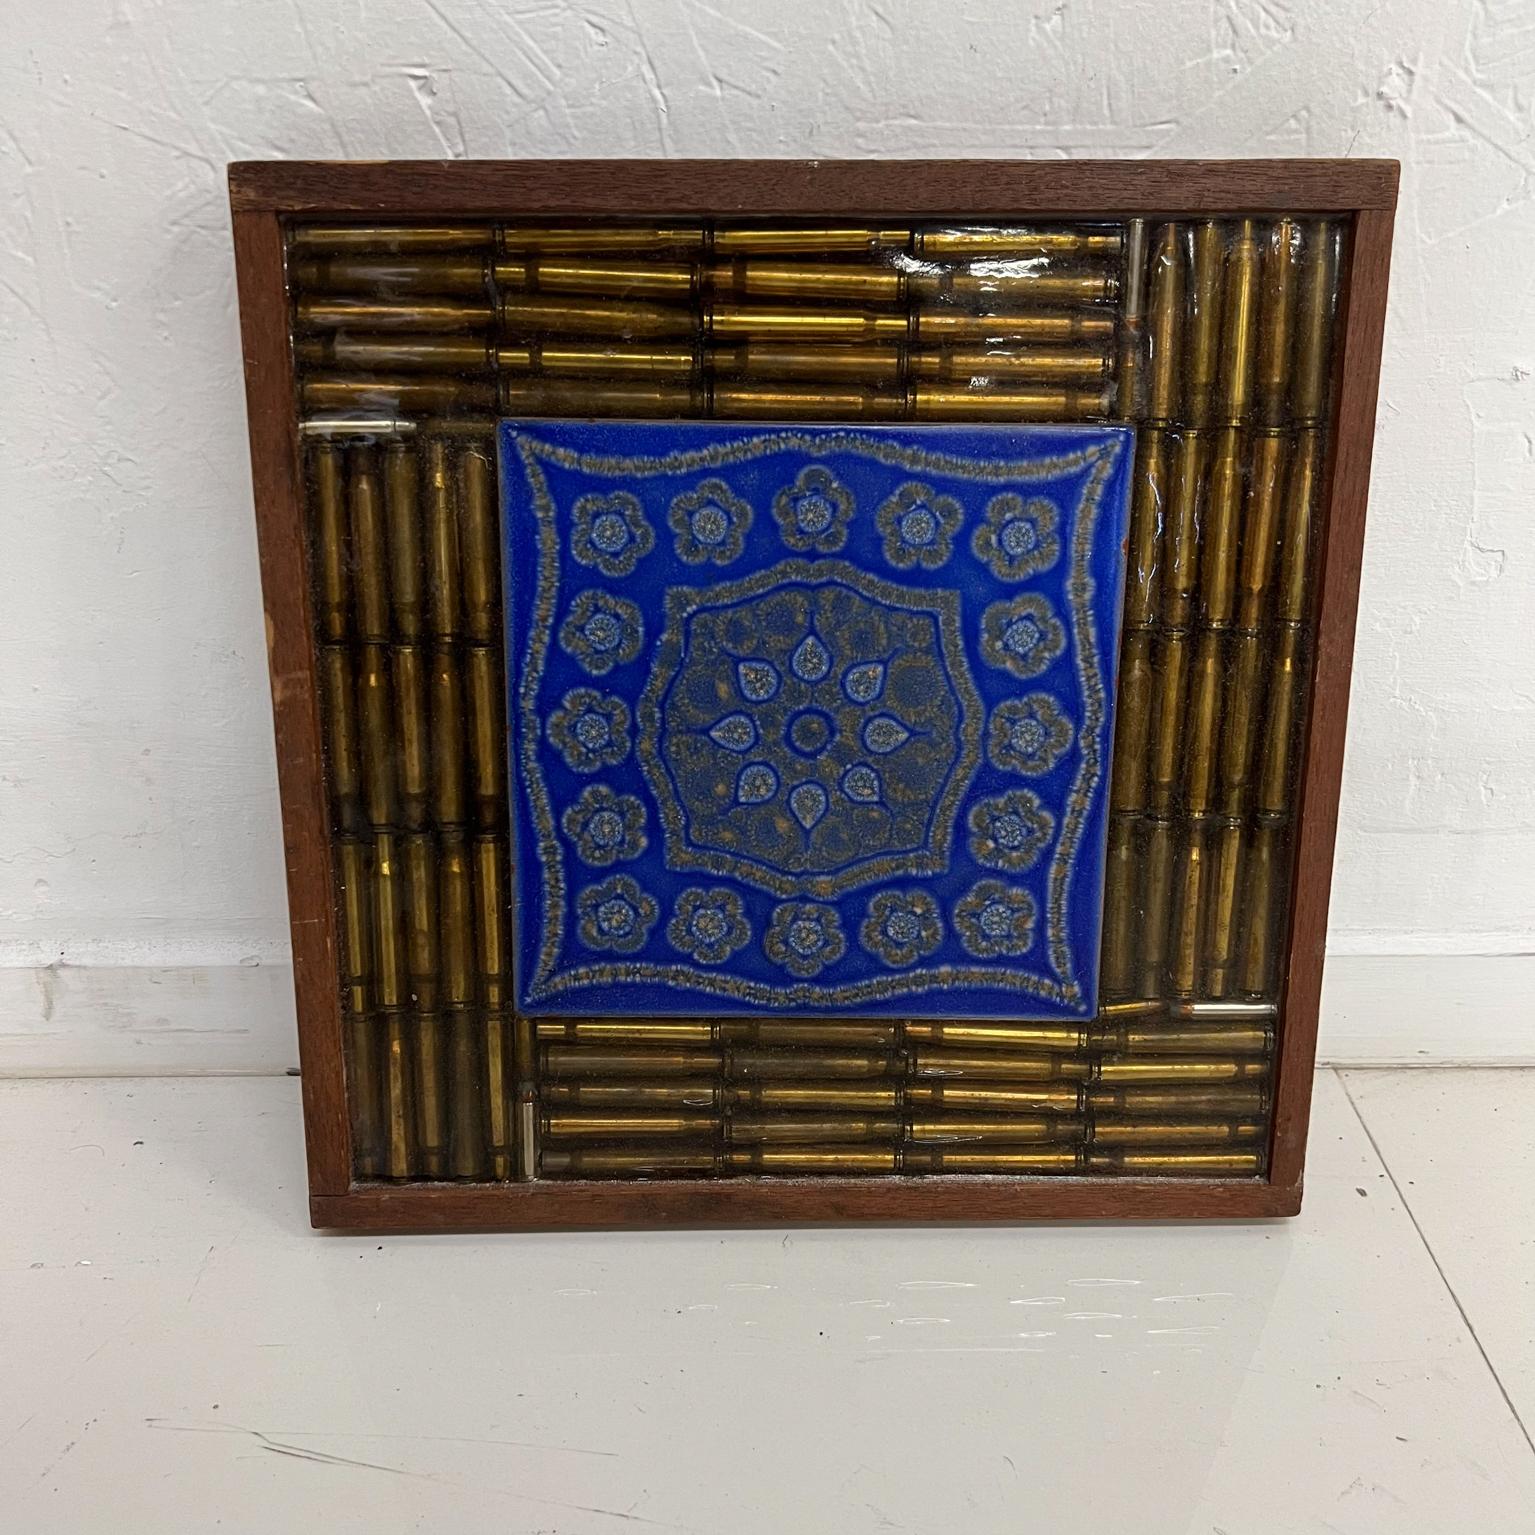 1970s Wall Art Wood Framed Bullet Mosaic with decorative blue tile 
13.5 x 13.75 x 1.25 thick
Preowned vintage unrestored condition.
See images provided.
 